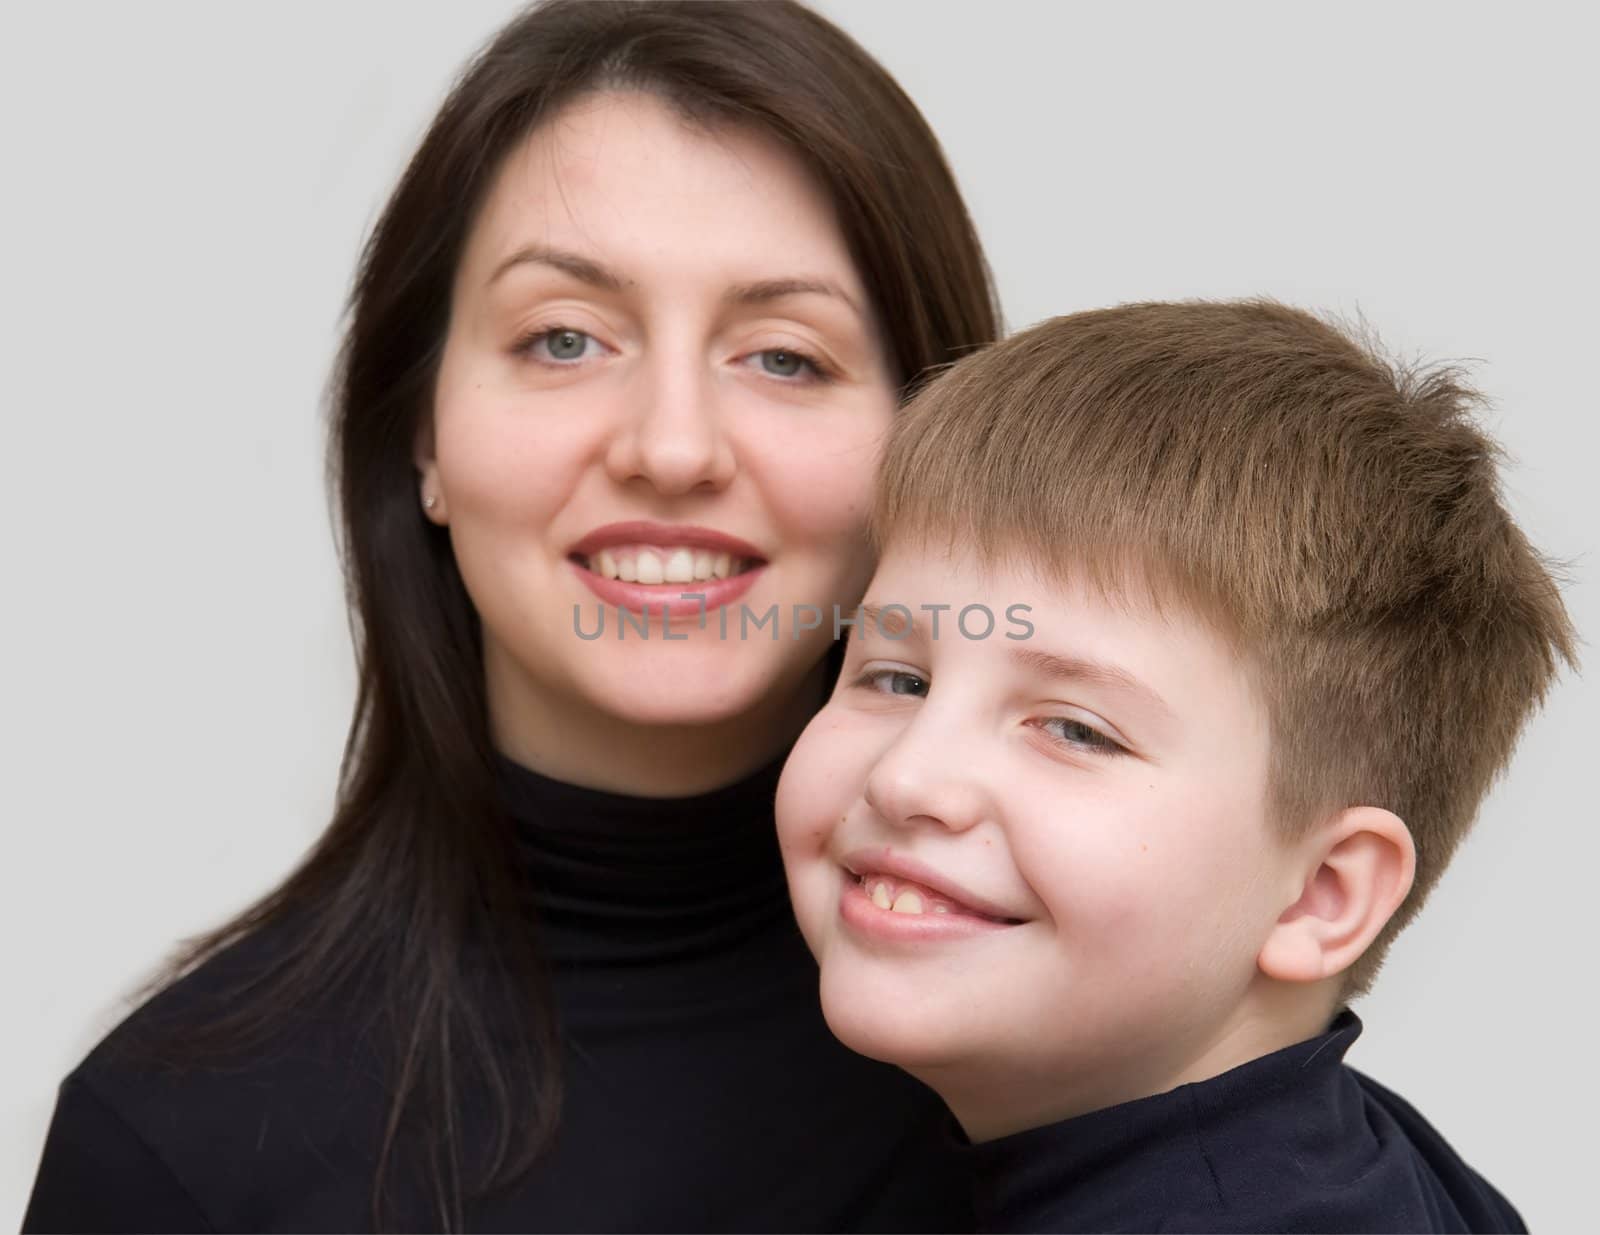 Smiling family. Mum and the son on a grey background.